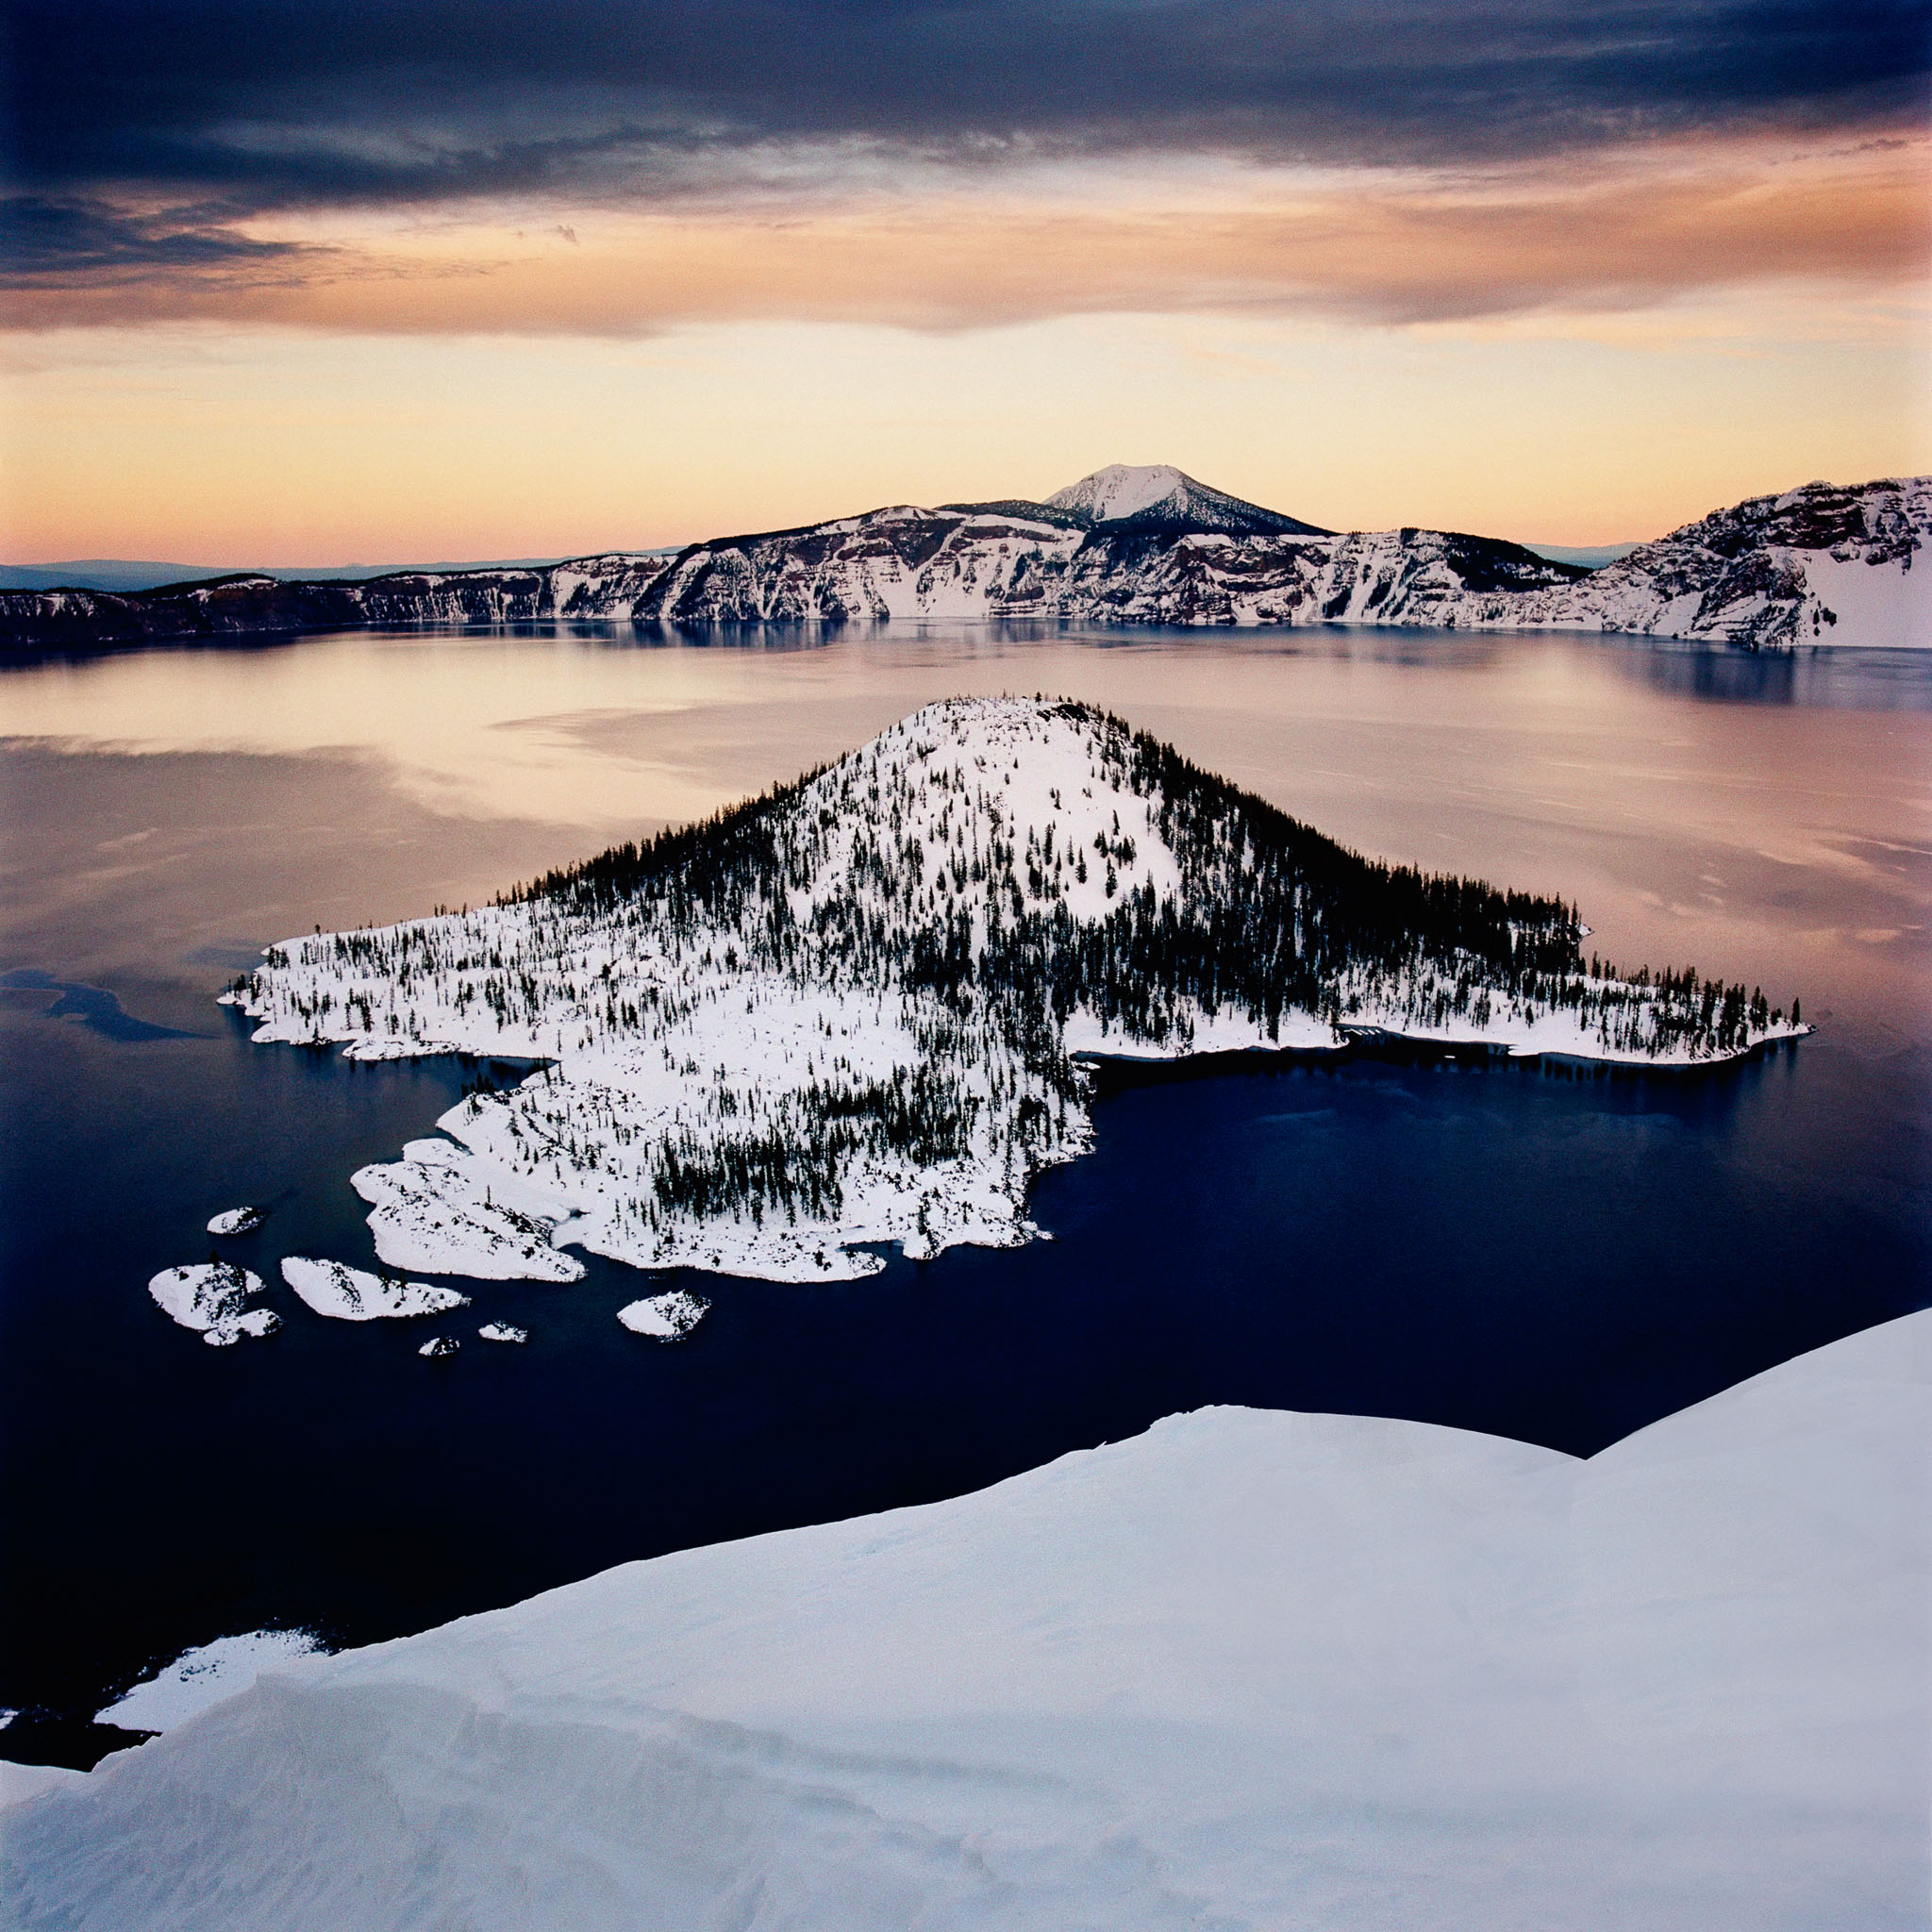 wizard-island-crater-lake-national-park-central-or-8x8.jpg